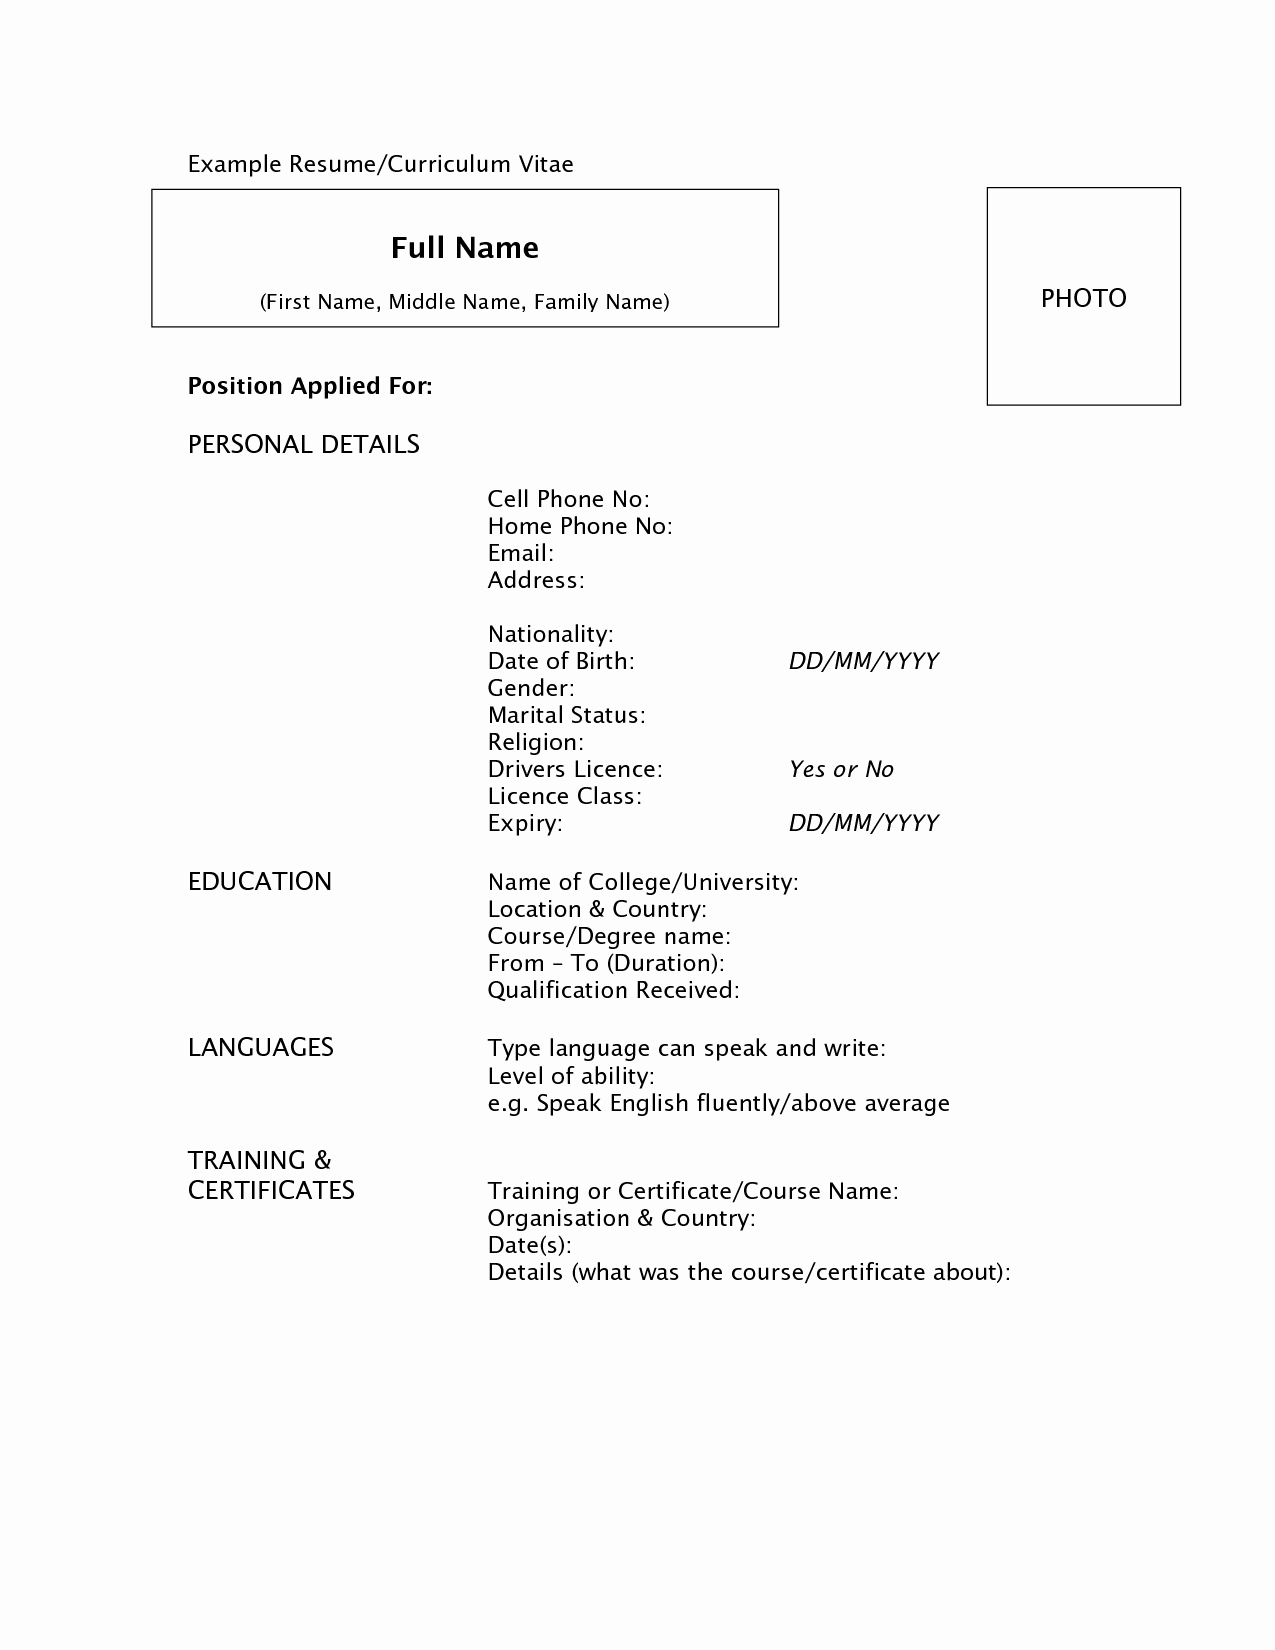 Sample Reference Sheet for Resume Unique Personal Reference List Template Portablegasgrillweber